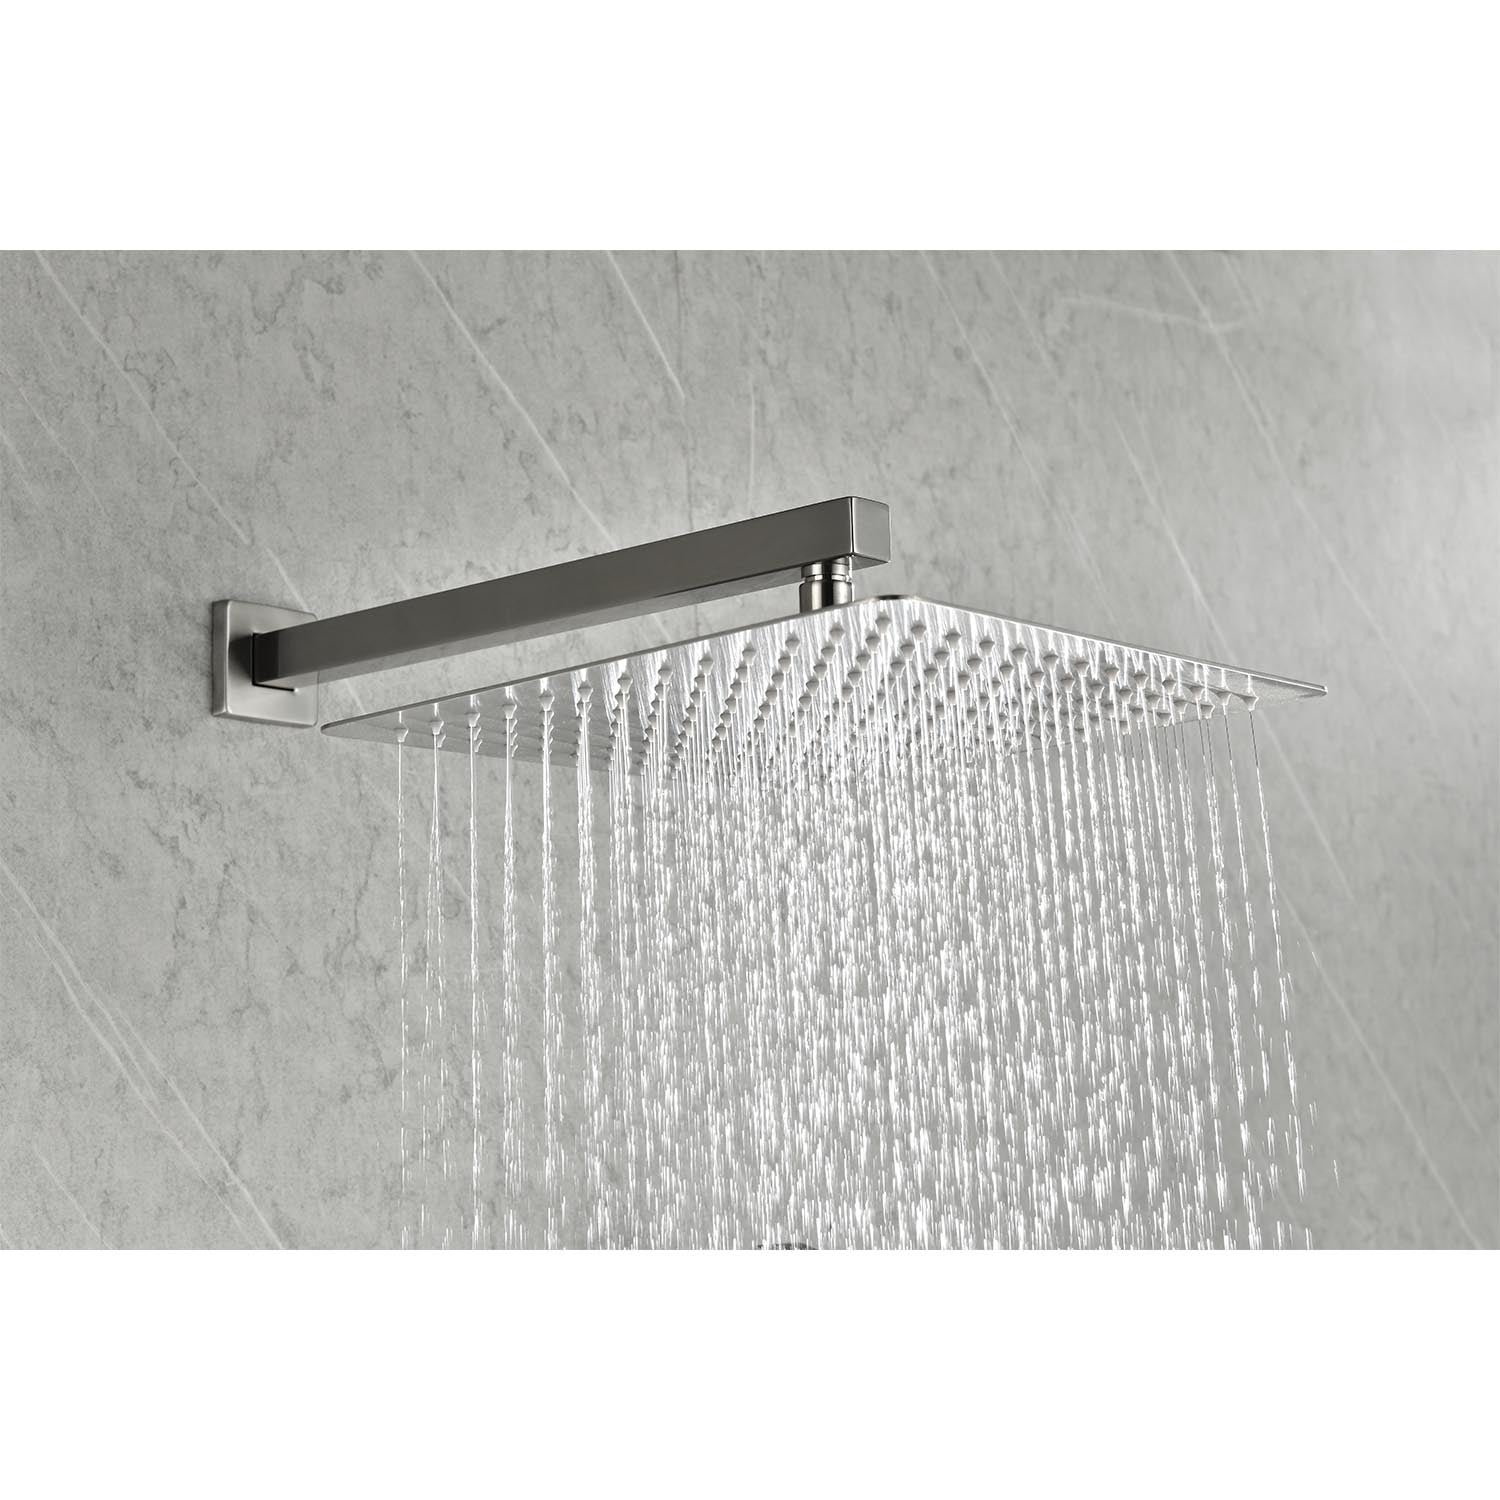 16" Rain Shower Head Systems Wall Mounted Shower